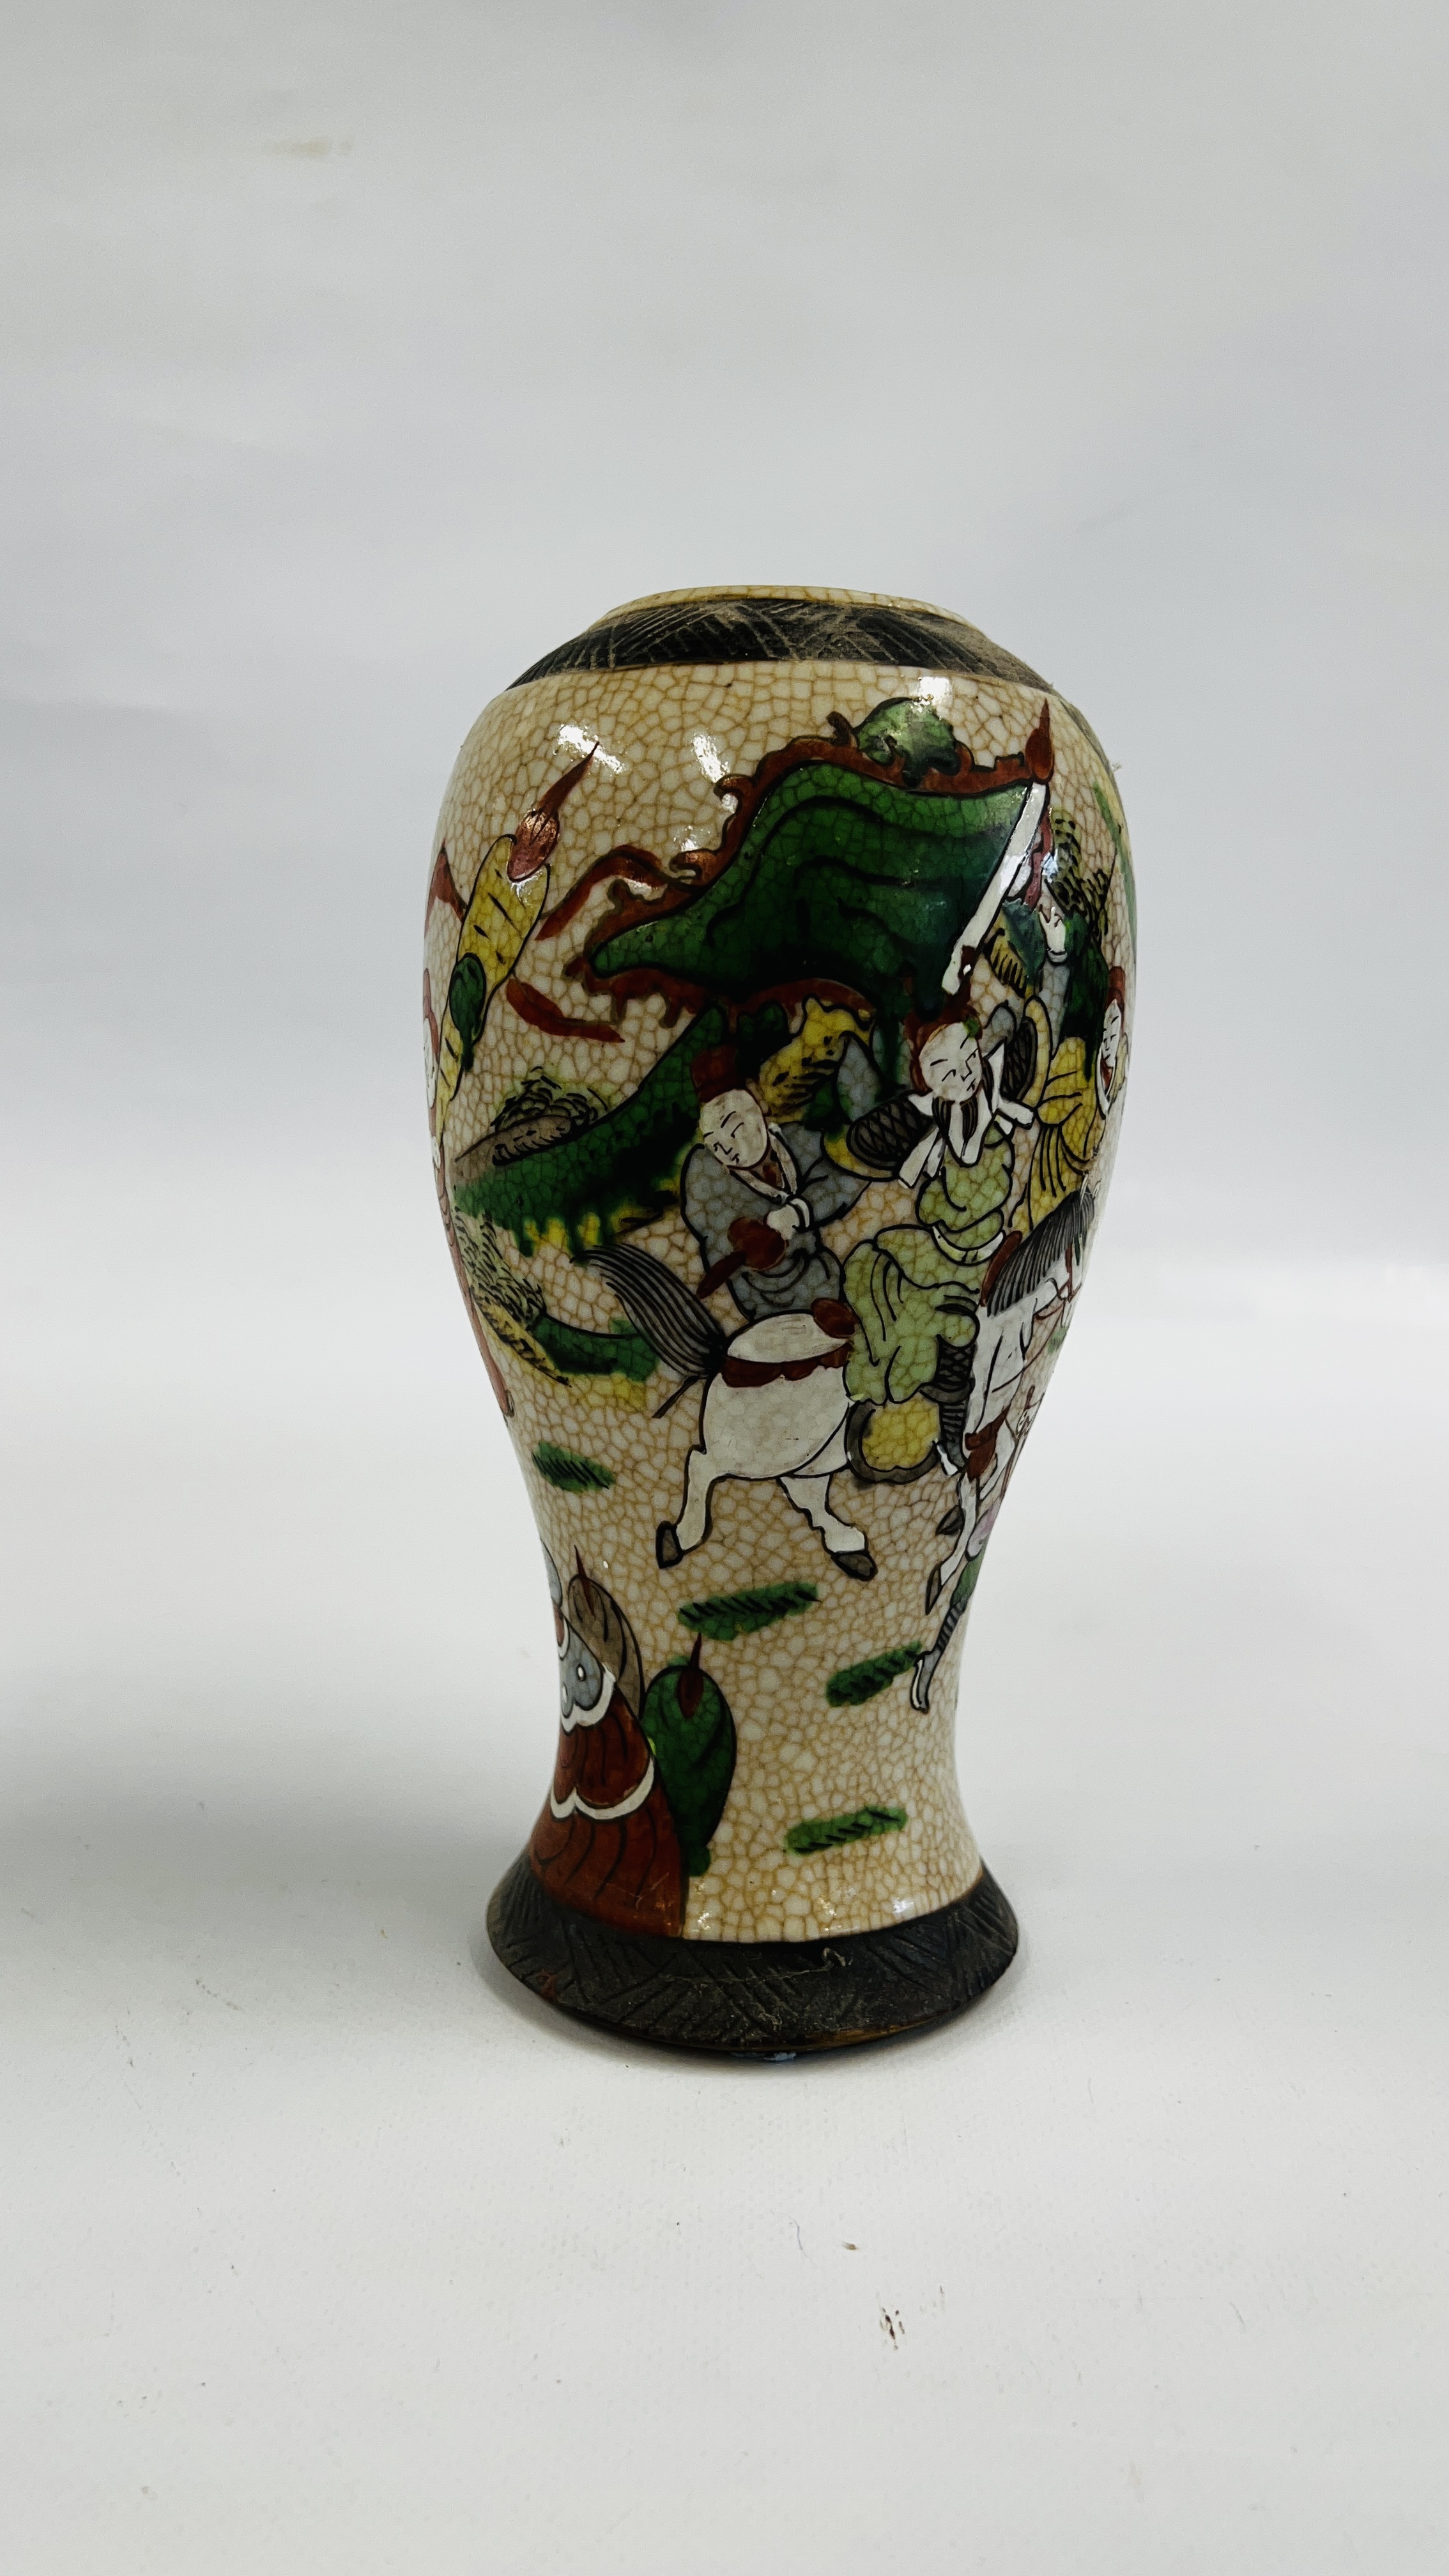 A CHINESE NANJING STYLE CRACKLED GLAZED VASE DECORATED WITH CHARACTERS AND WARRIORS UPON HORSEBACK